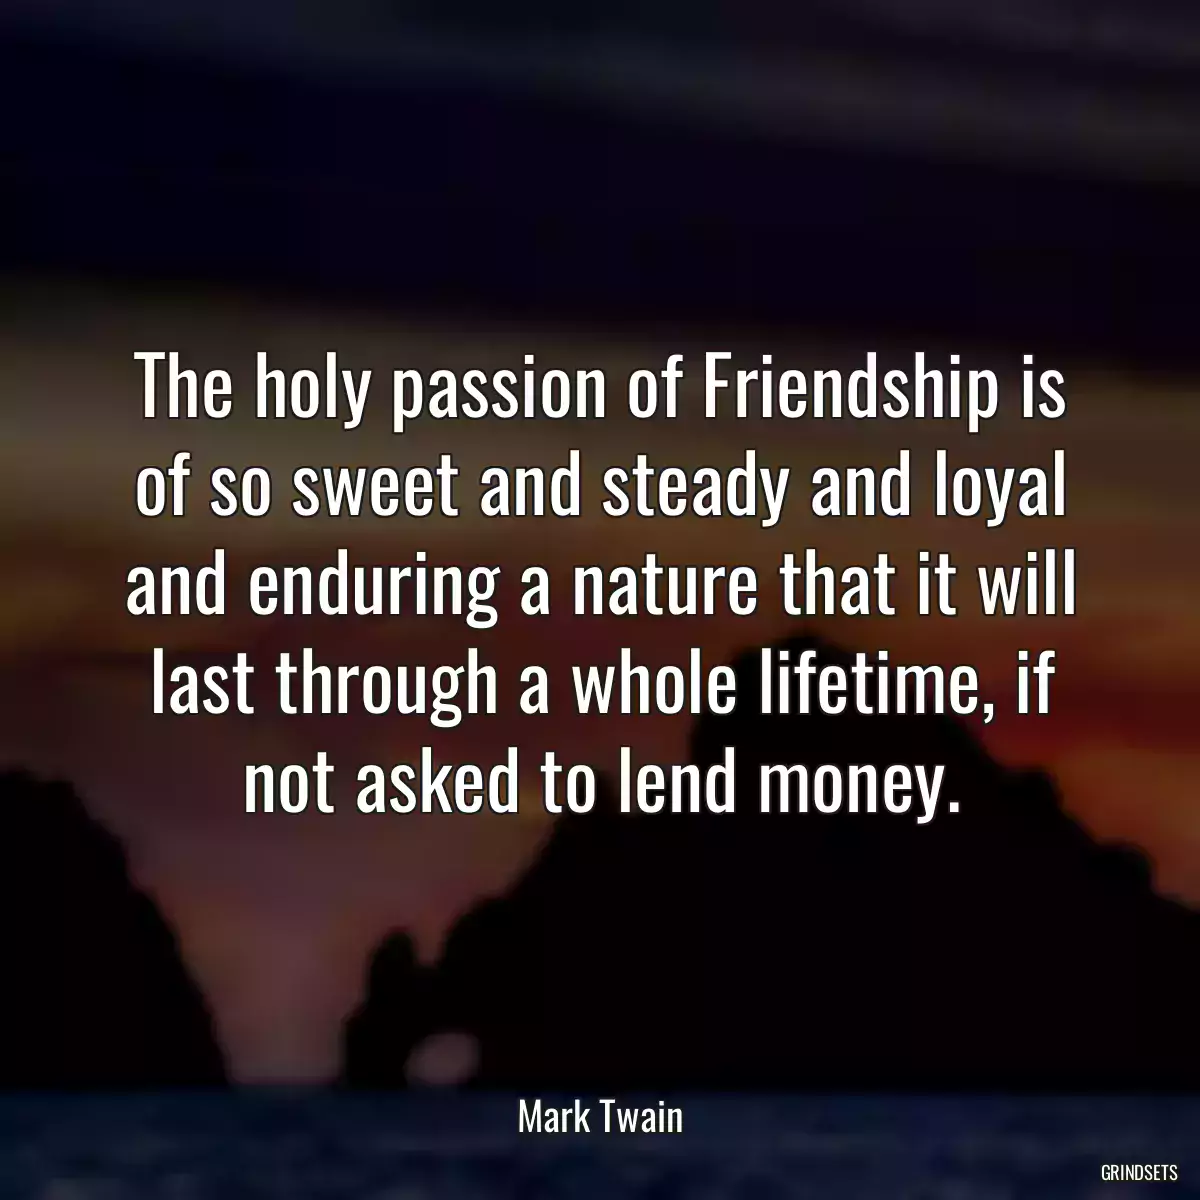 The holy passion of Friendship is of so sweet and steady and loyal and enduring a nature that it will last through a whole lifetime, if not asked to lend money.